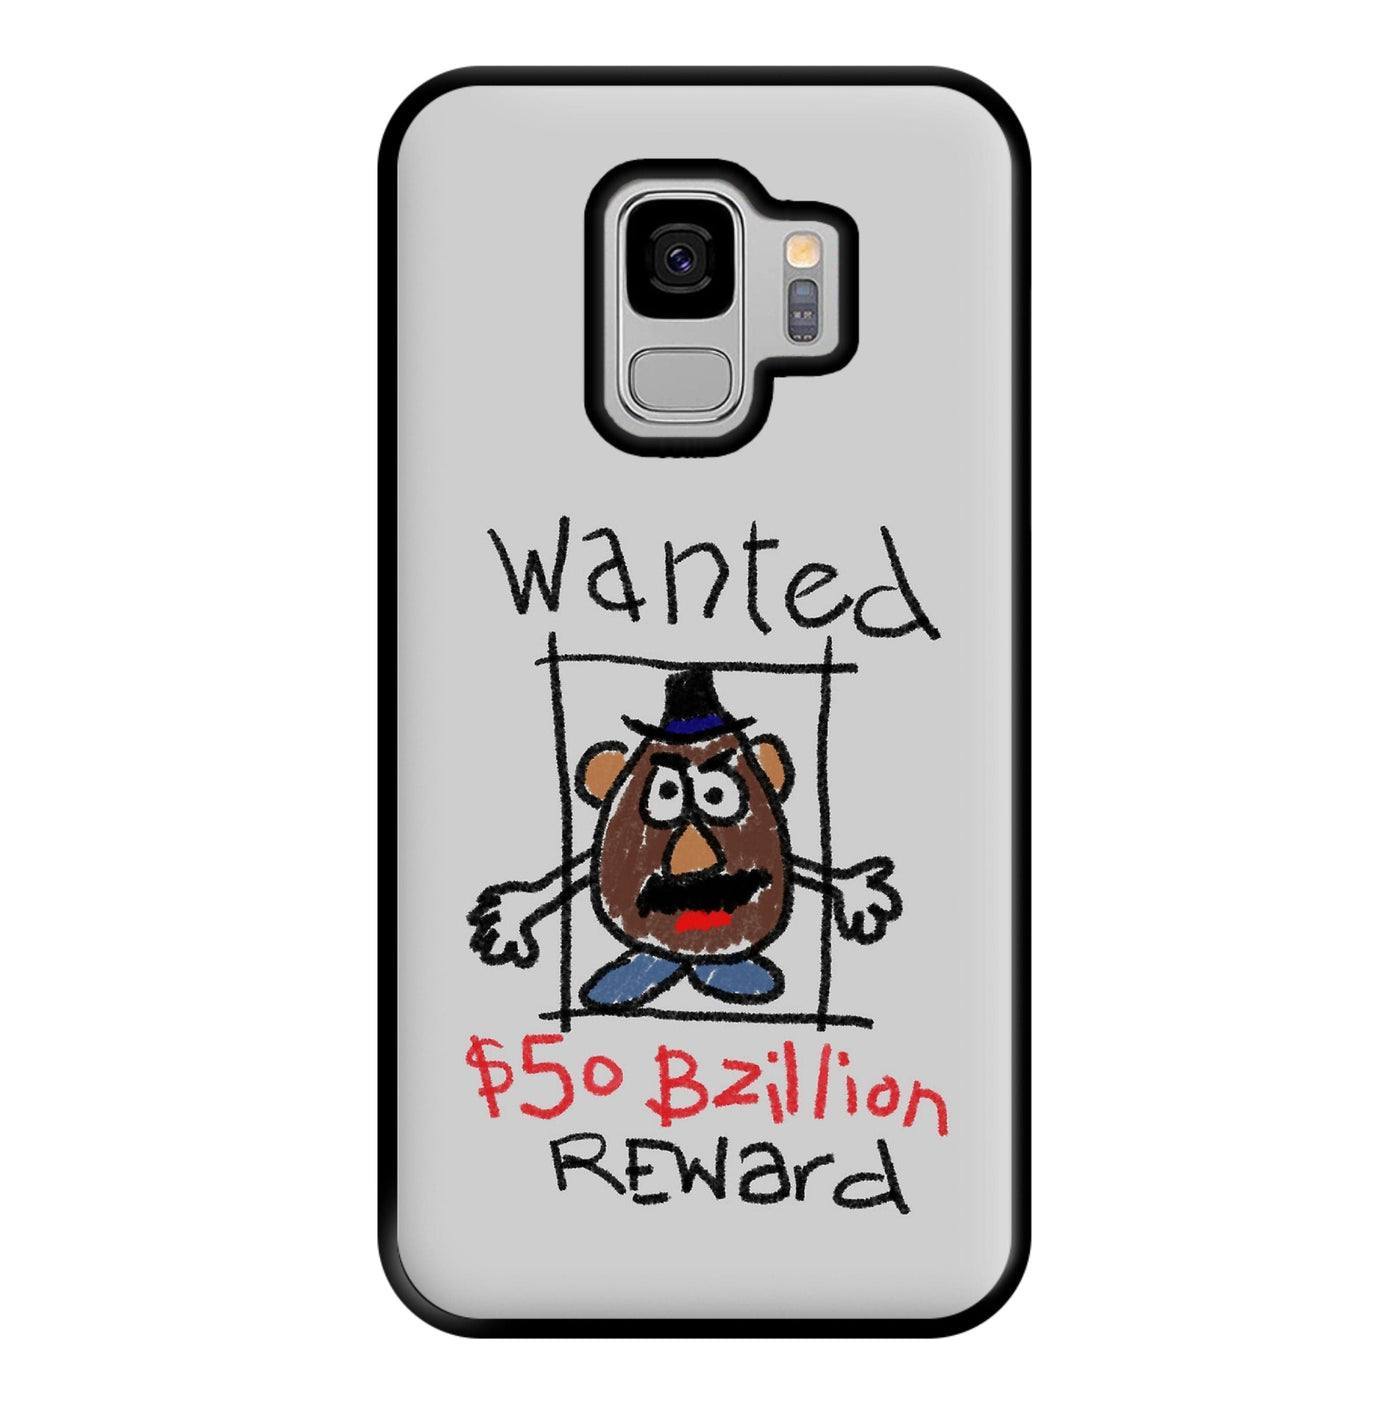 Mr Potato Head - Wanted Toy Story Phone Case